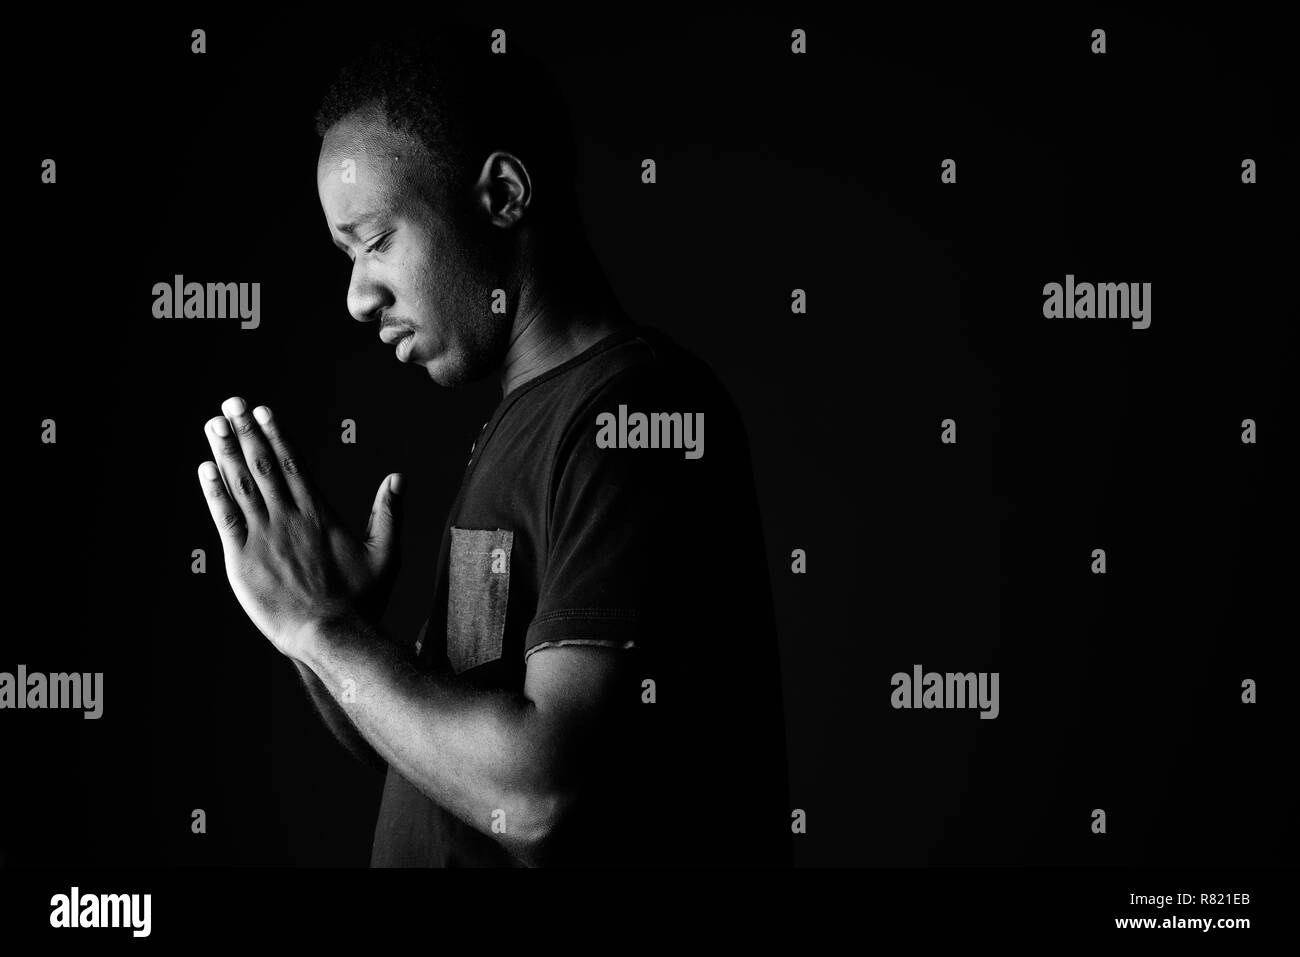 Sad young African man praying in black and white Stock Photo